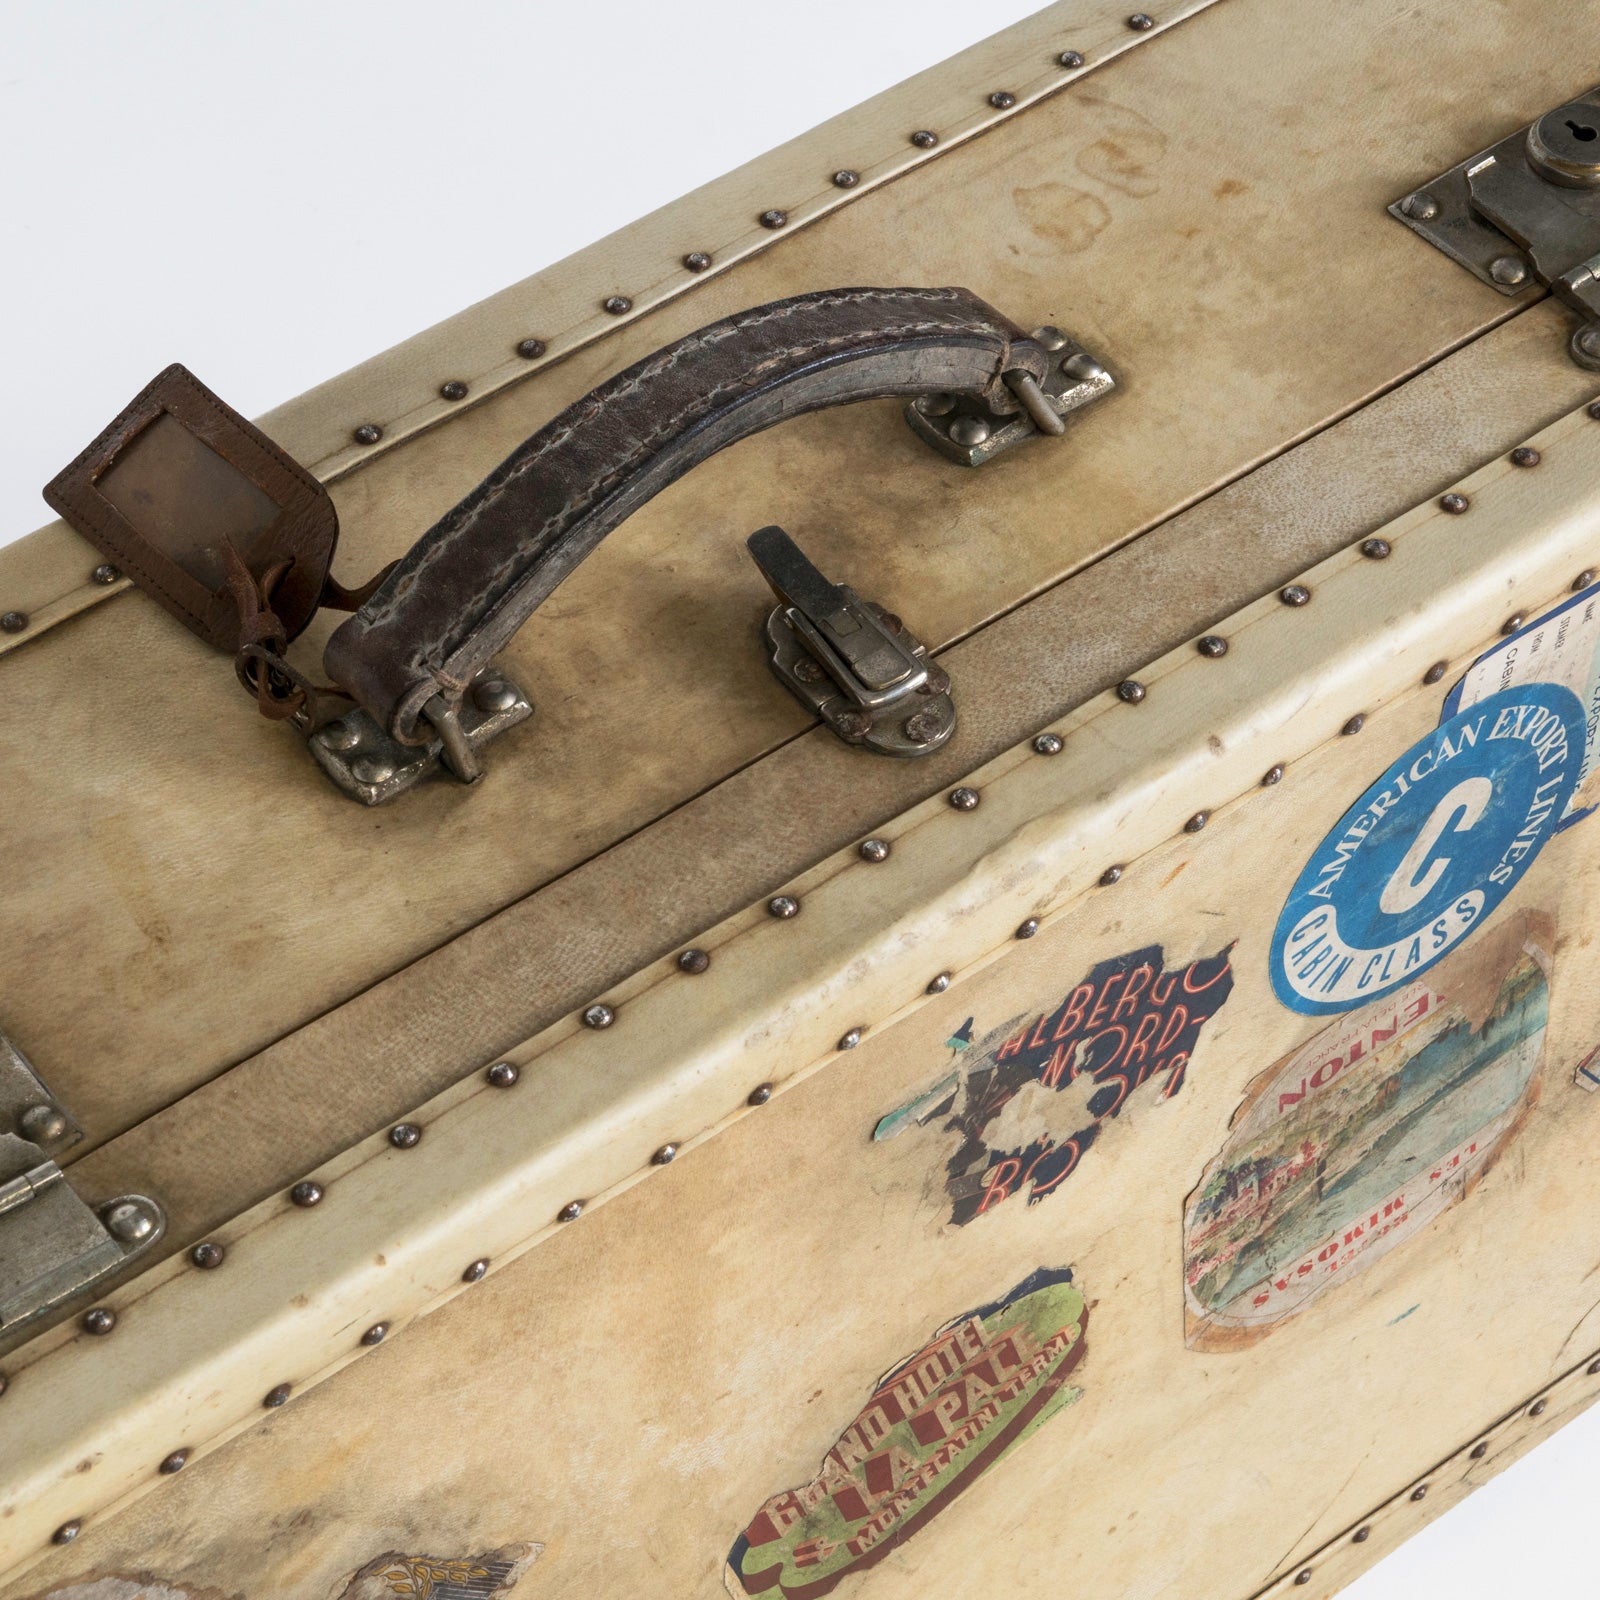 French Vellum Suitcase or Valise 1920s